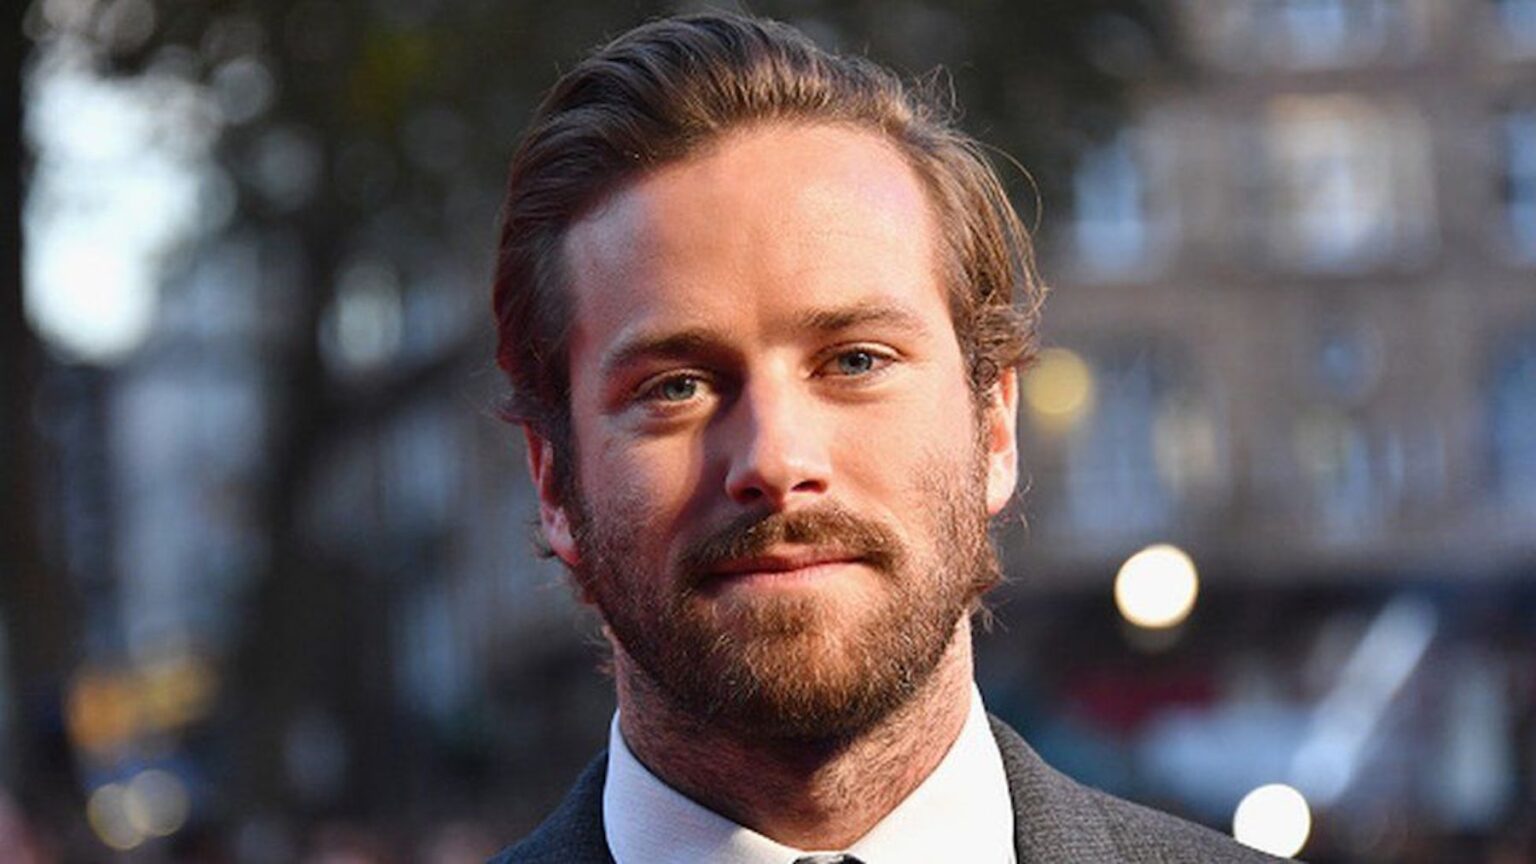 'The Billion Dollar Spy' drops Armie Hammer following the sexual assault allegations against him. Will his other movies follow suit?